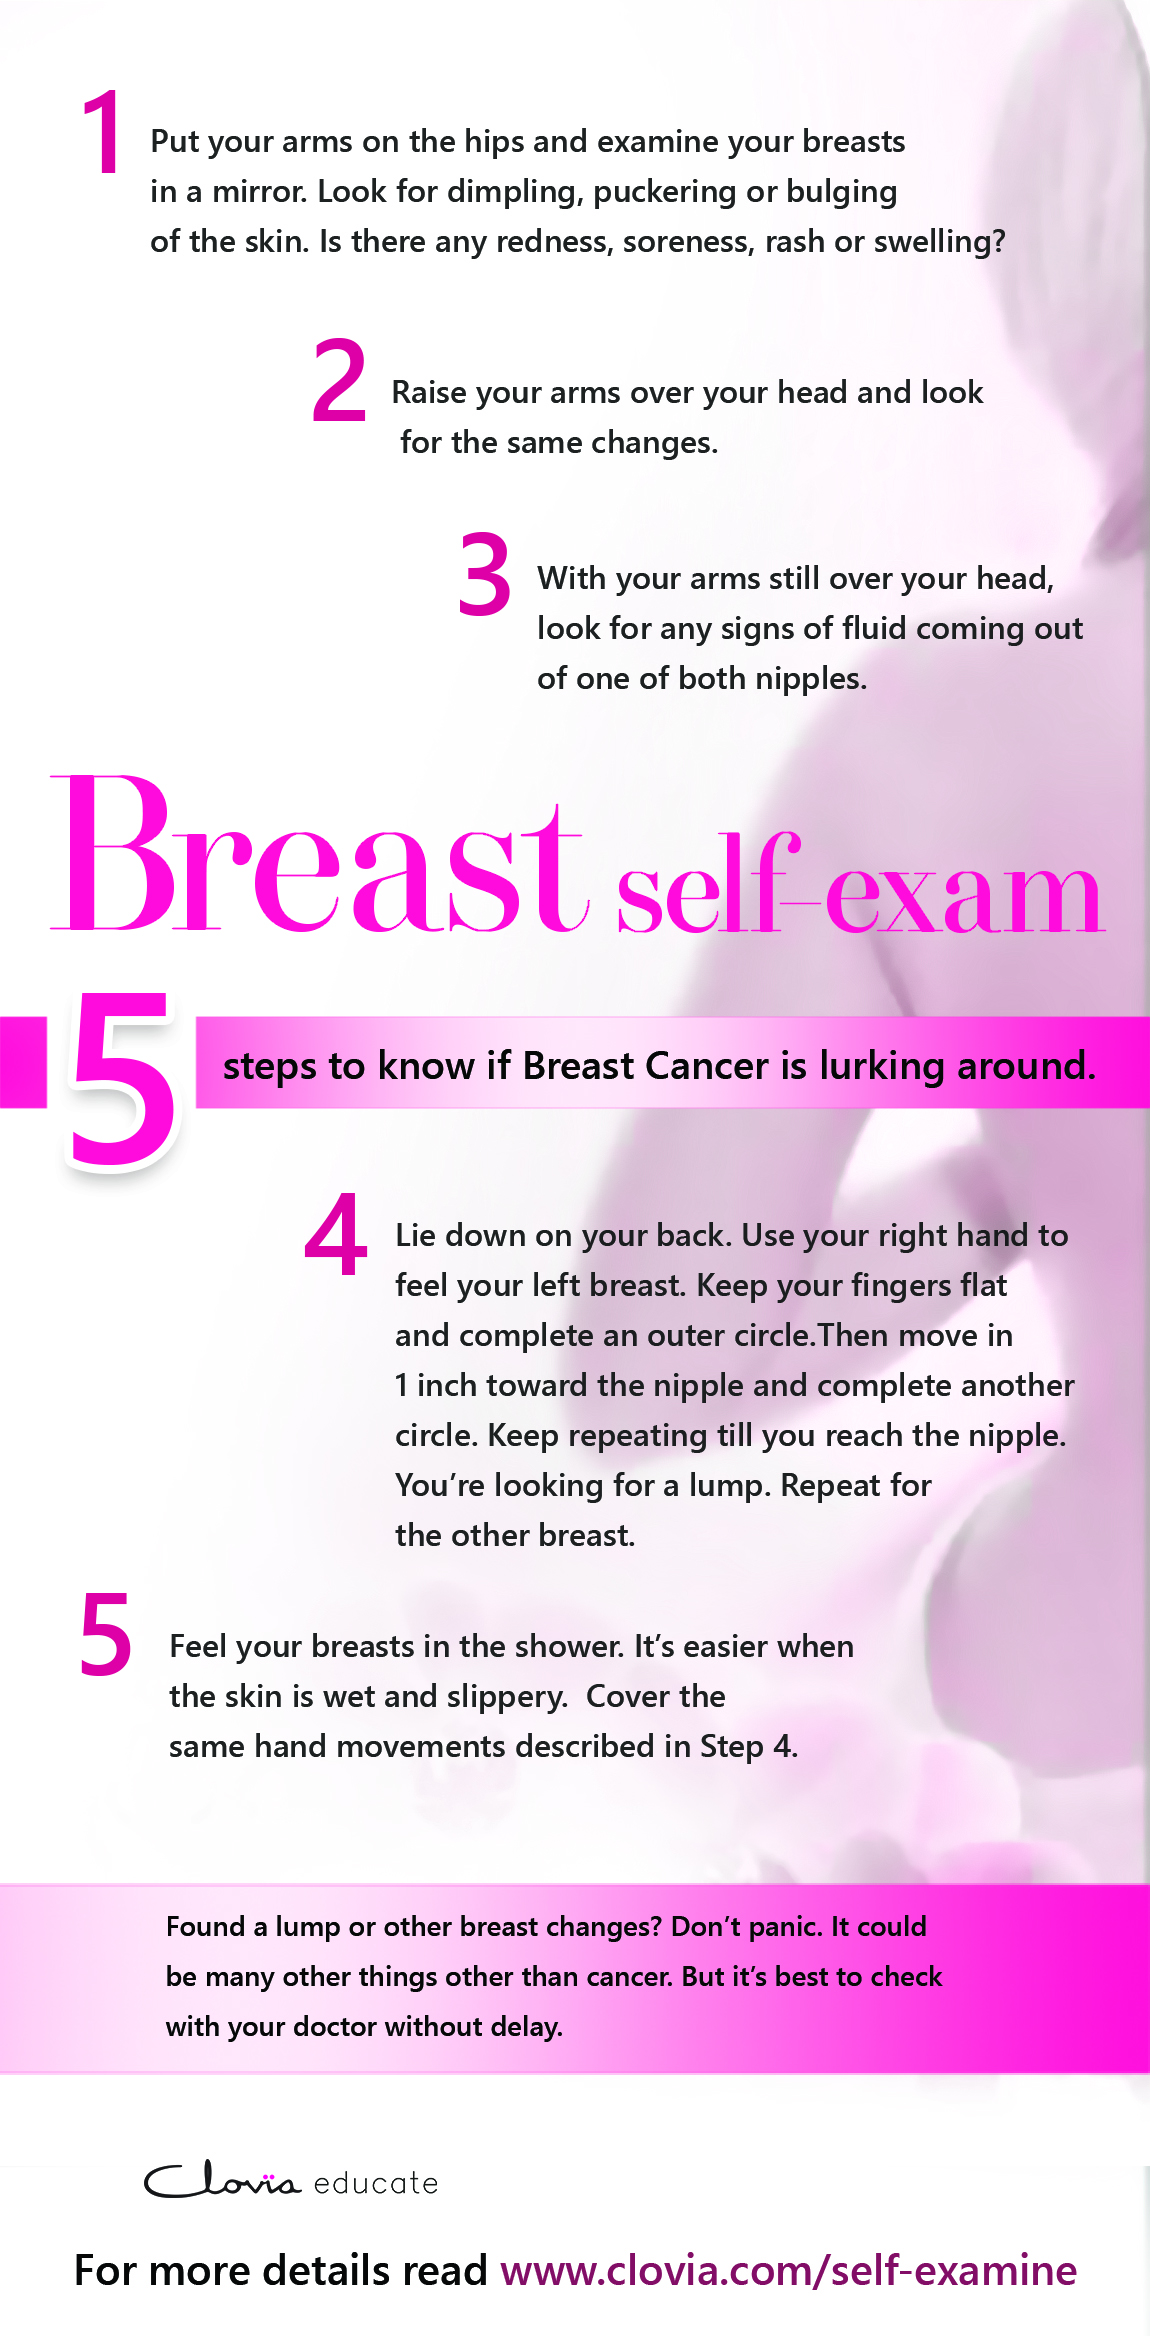 literature review on breast self examination in nigeria